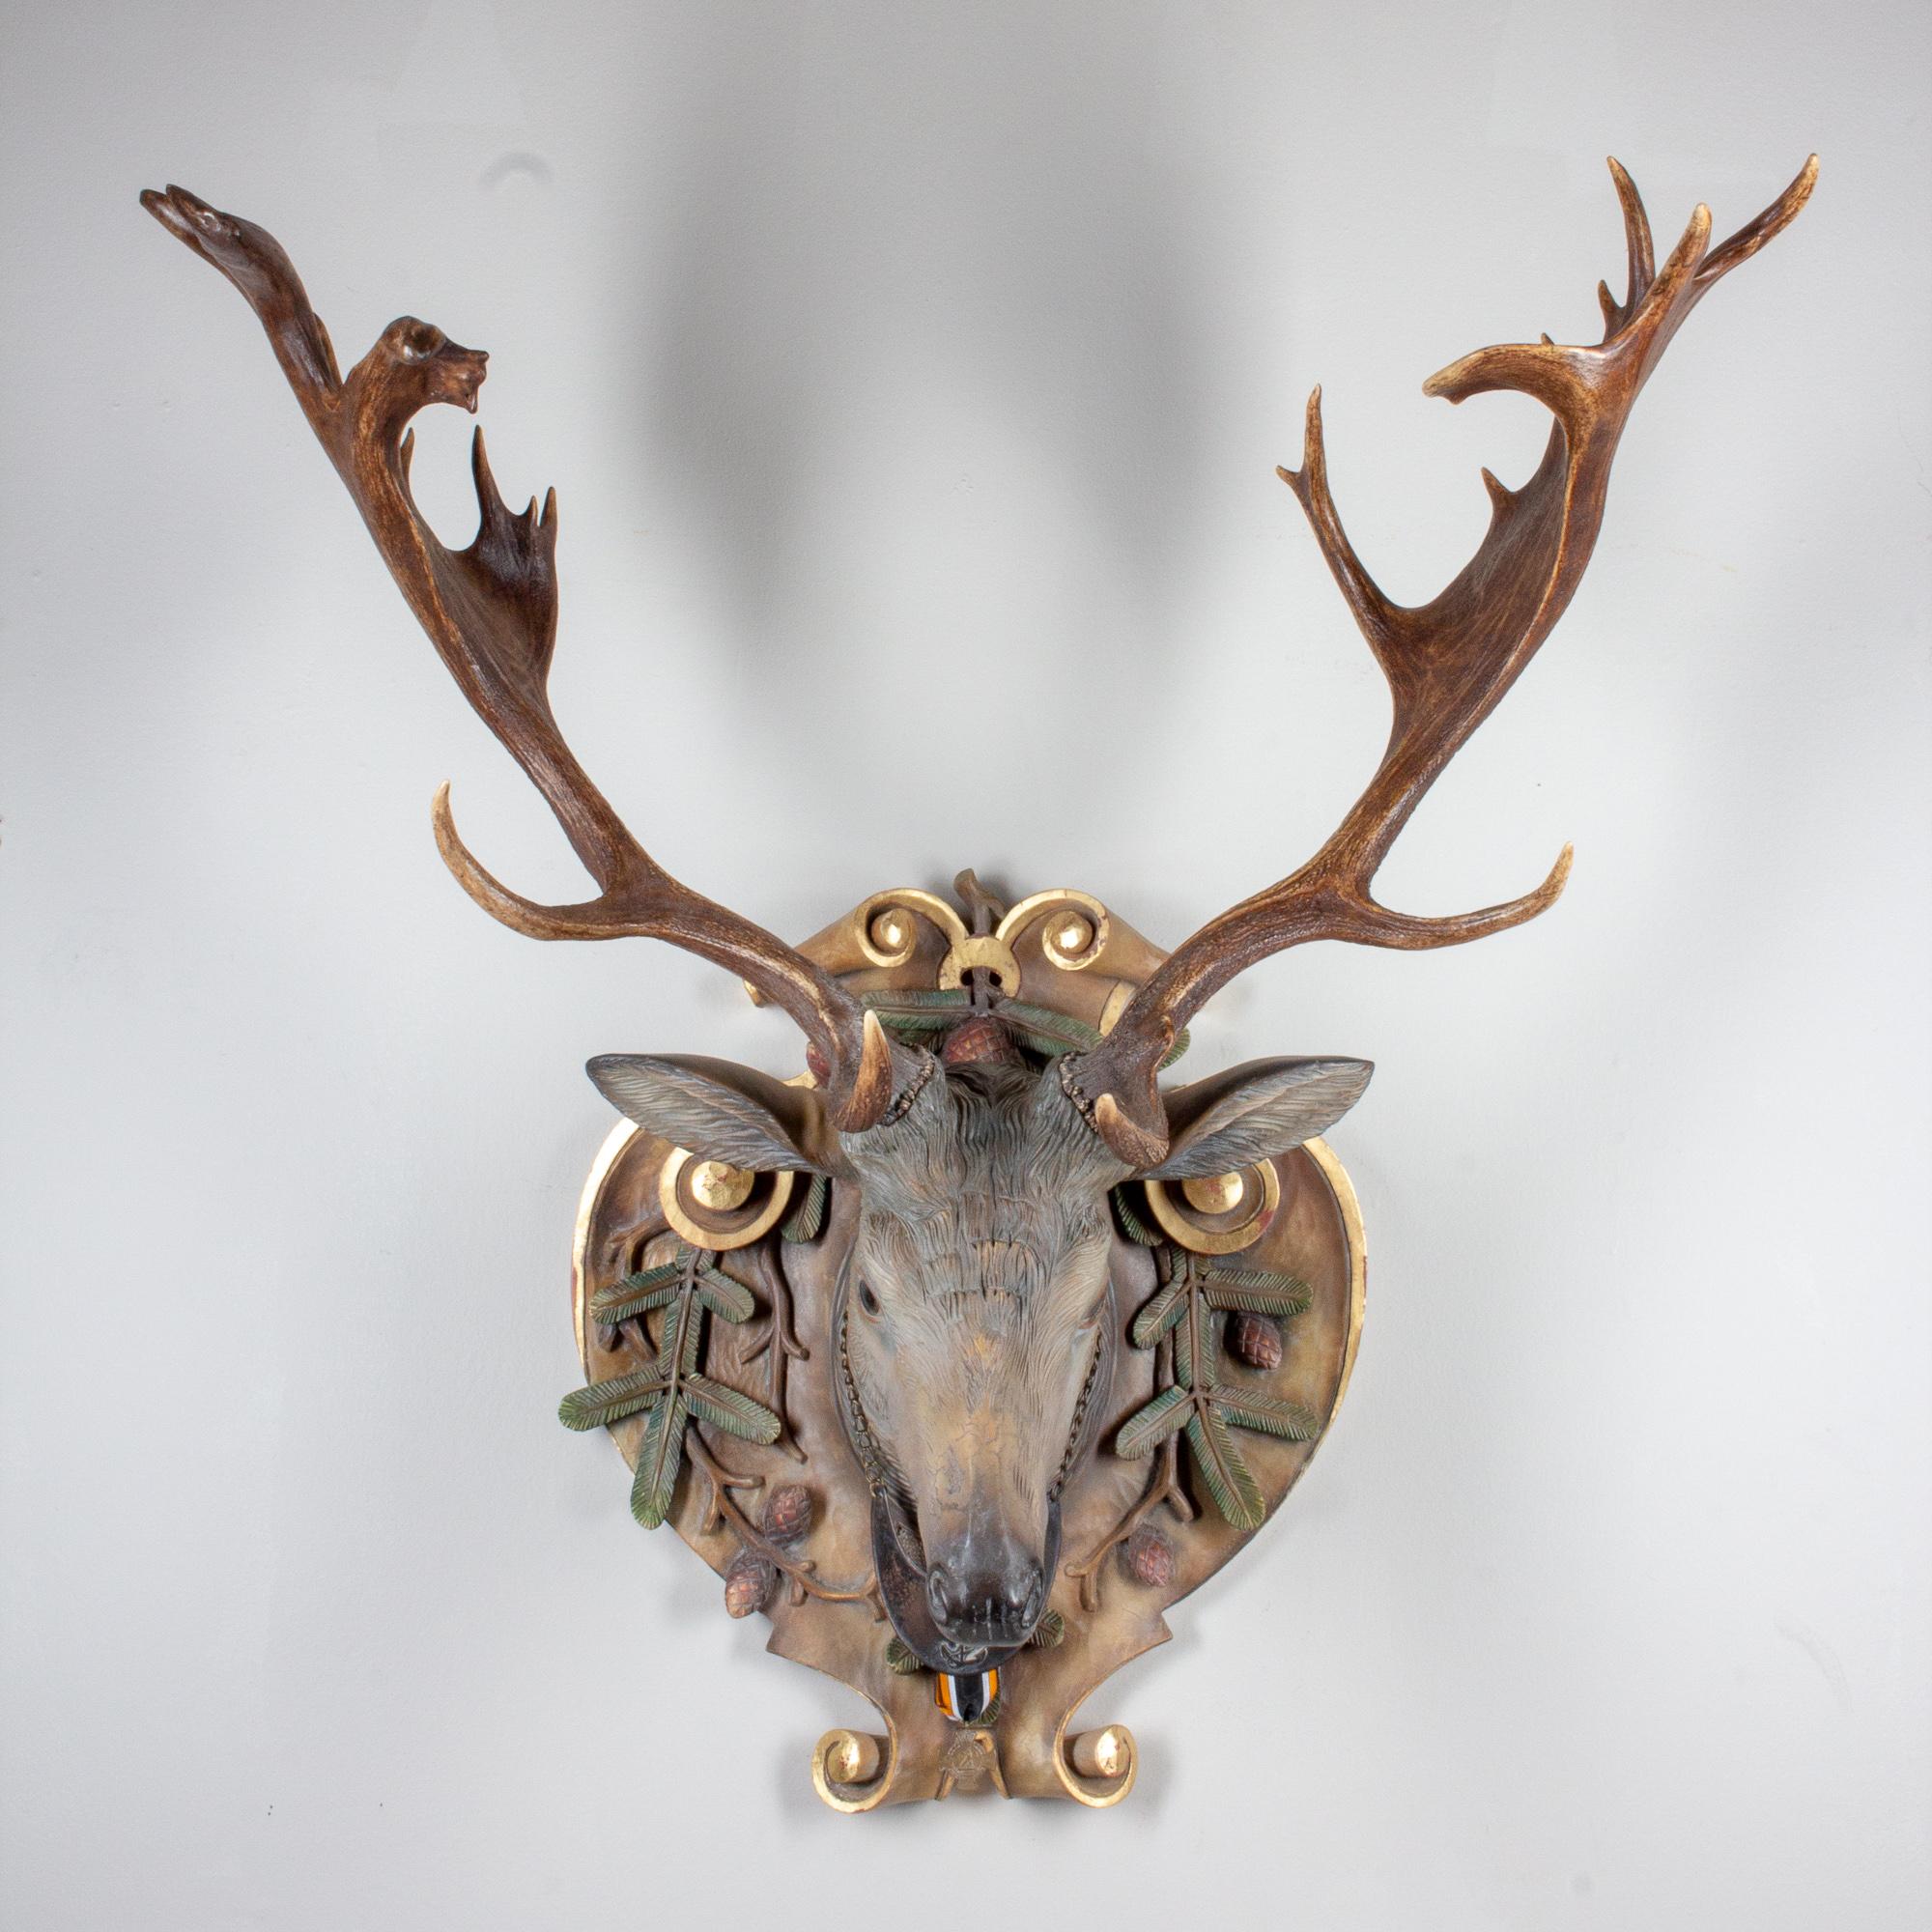 A stunning and very lifelike hand-carved linden wood Fallow deer with Italian polychrome painting technique with antique Habsburg antlers from the Eckartsau Castle of Emperor Franz Josef in the Southern Austrian Alps, a favorite hunting Schloss of